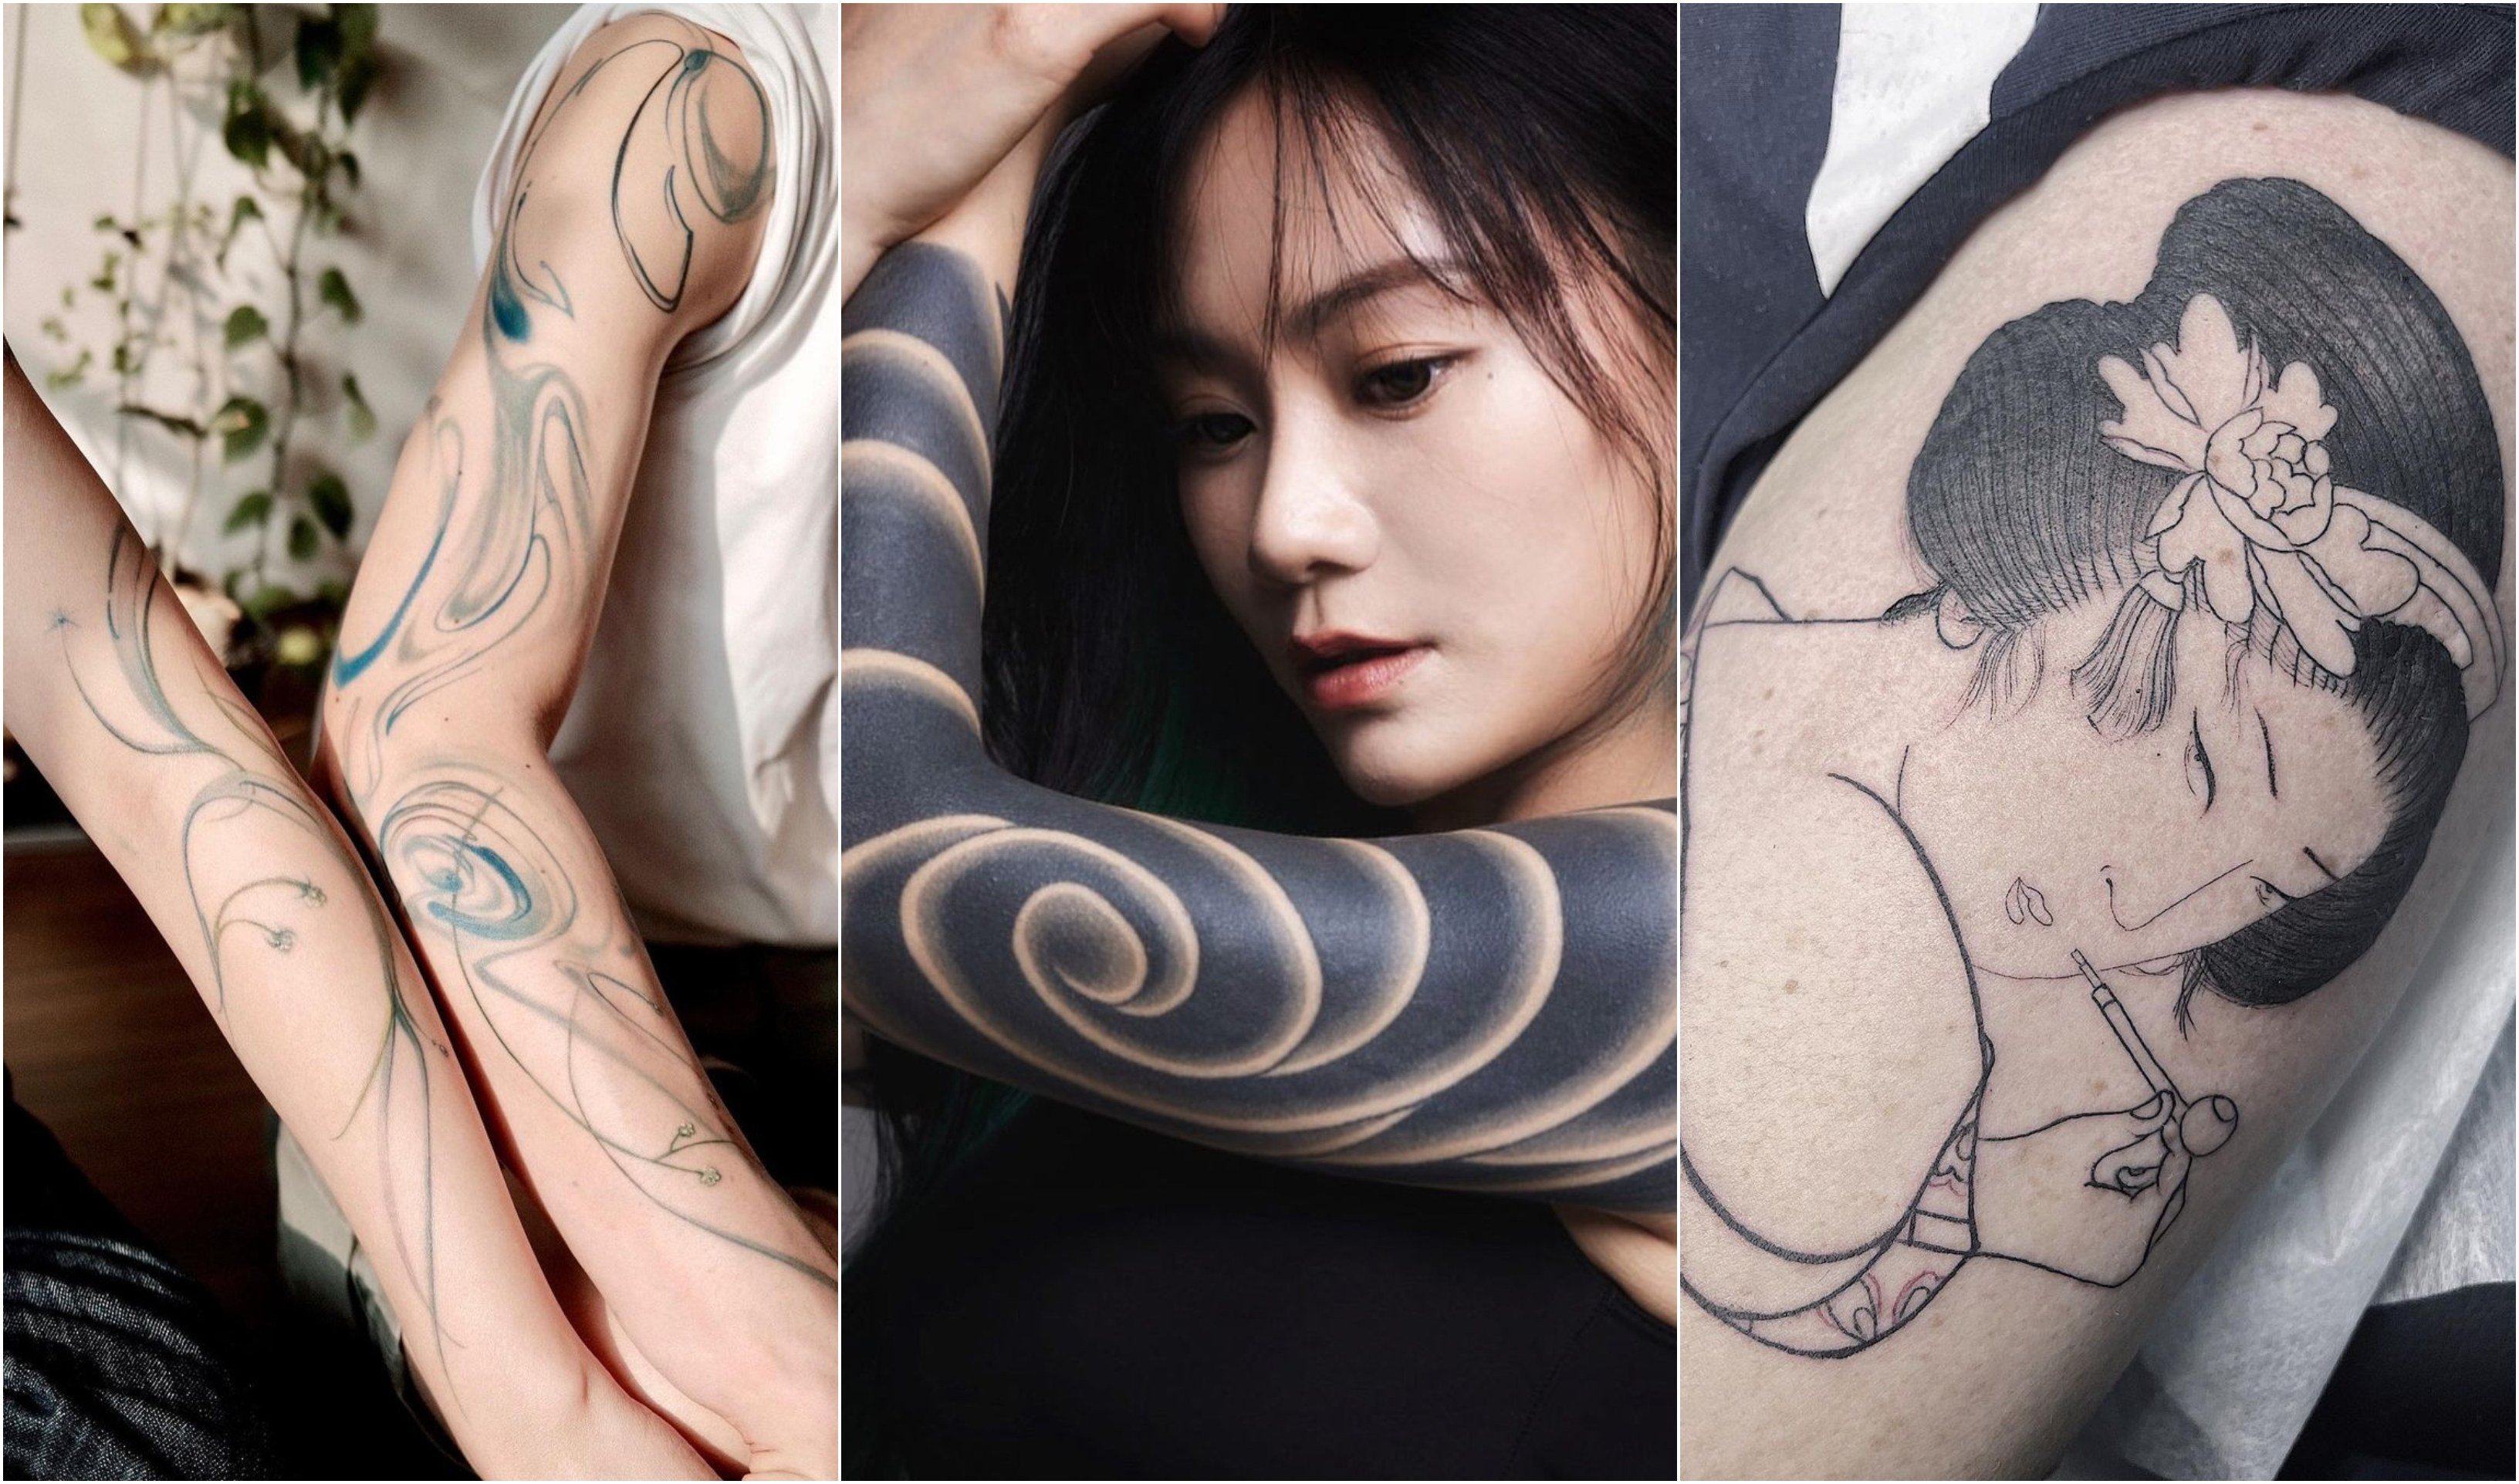 Hong Kong is home to tattoo art of the highest calibre, from Yeeki Lo’s intricately fine detail to Mirmanda’s fantastical creatures and Gaga Ma’s lines that flow like water. Photos: @gagama, @jenn_tattoo, @jenna_tattoo/Instagram